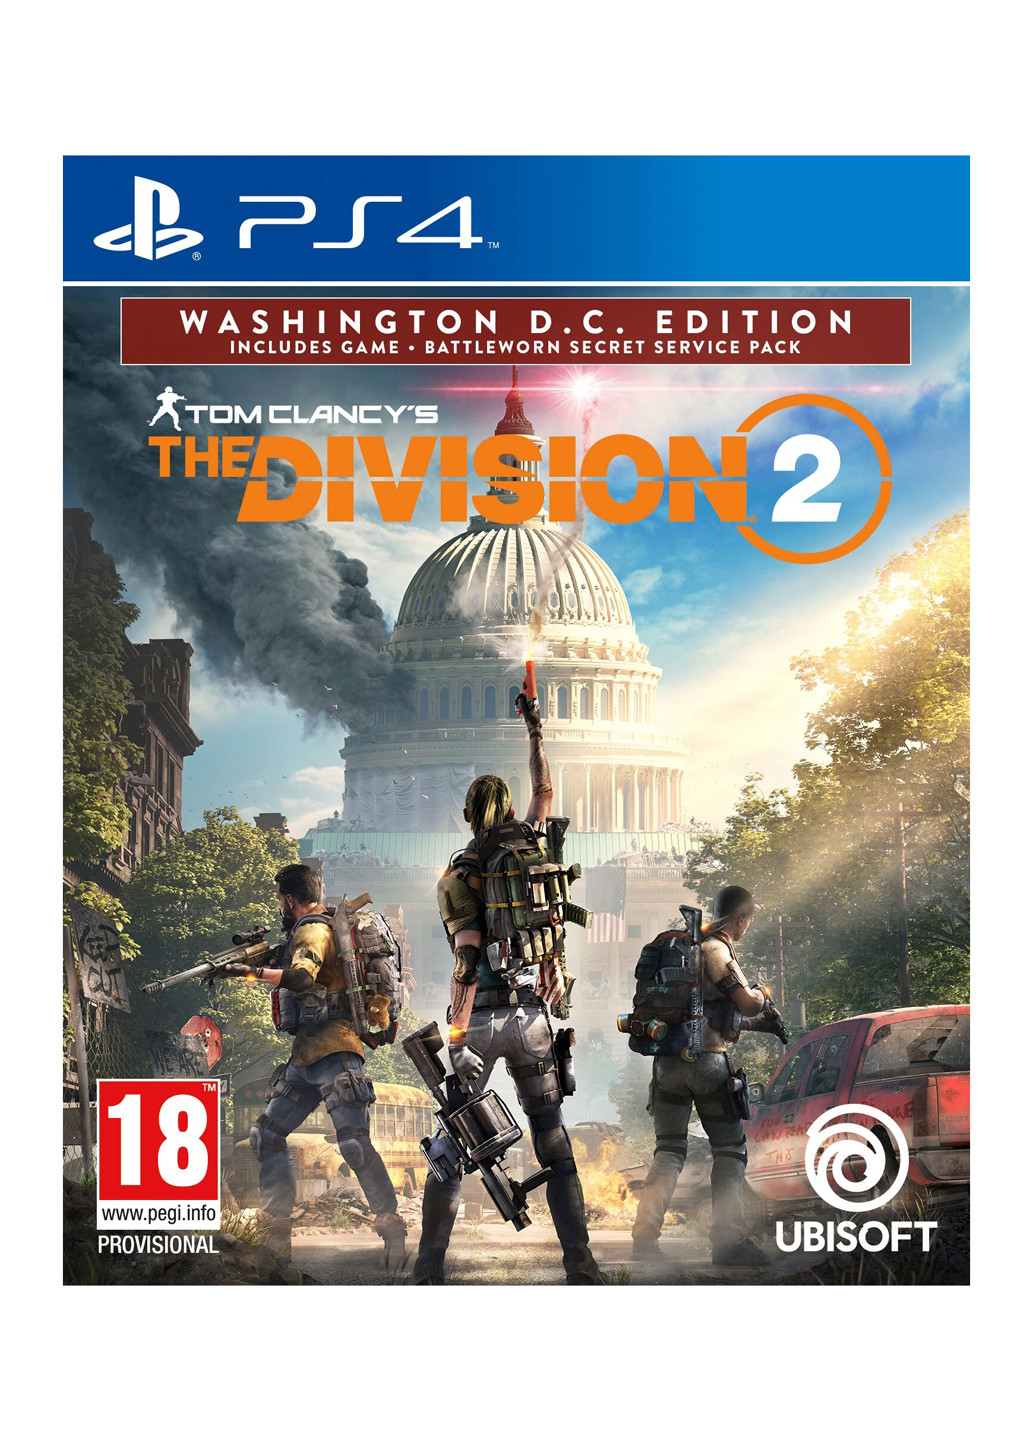 Гра PS4 Tom Clancy's The Division 2. Washington D.C. Edition [Blu-Ray диск] Games Software игра ps4 tom clancy's the division 2. washington d.c. edition [blu-ray диск] (150134298)